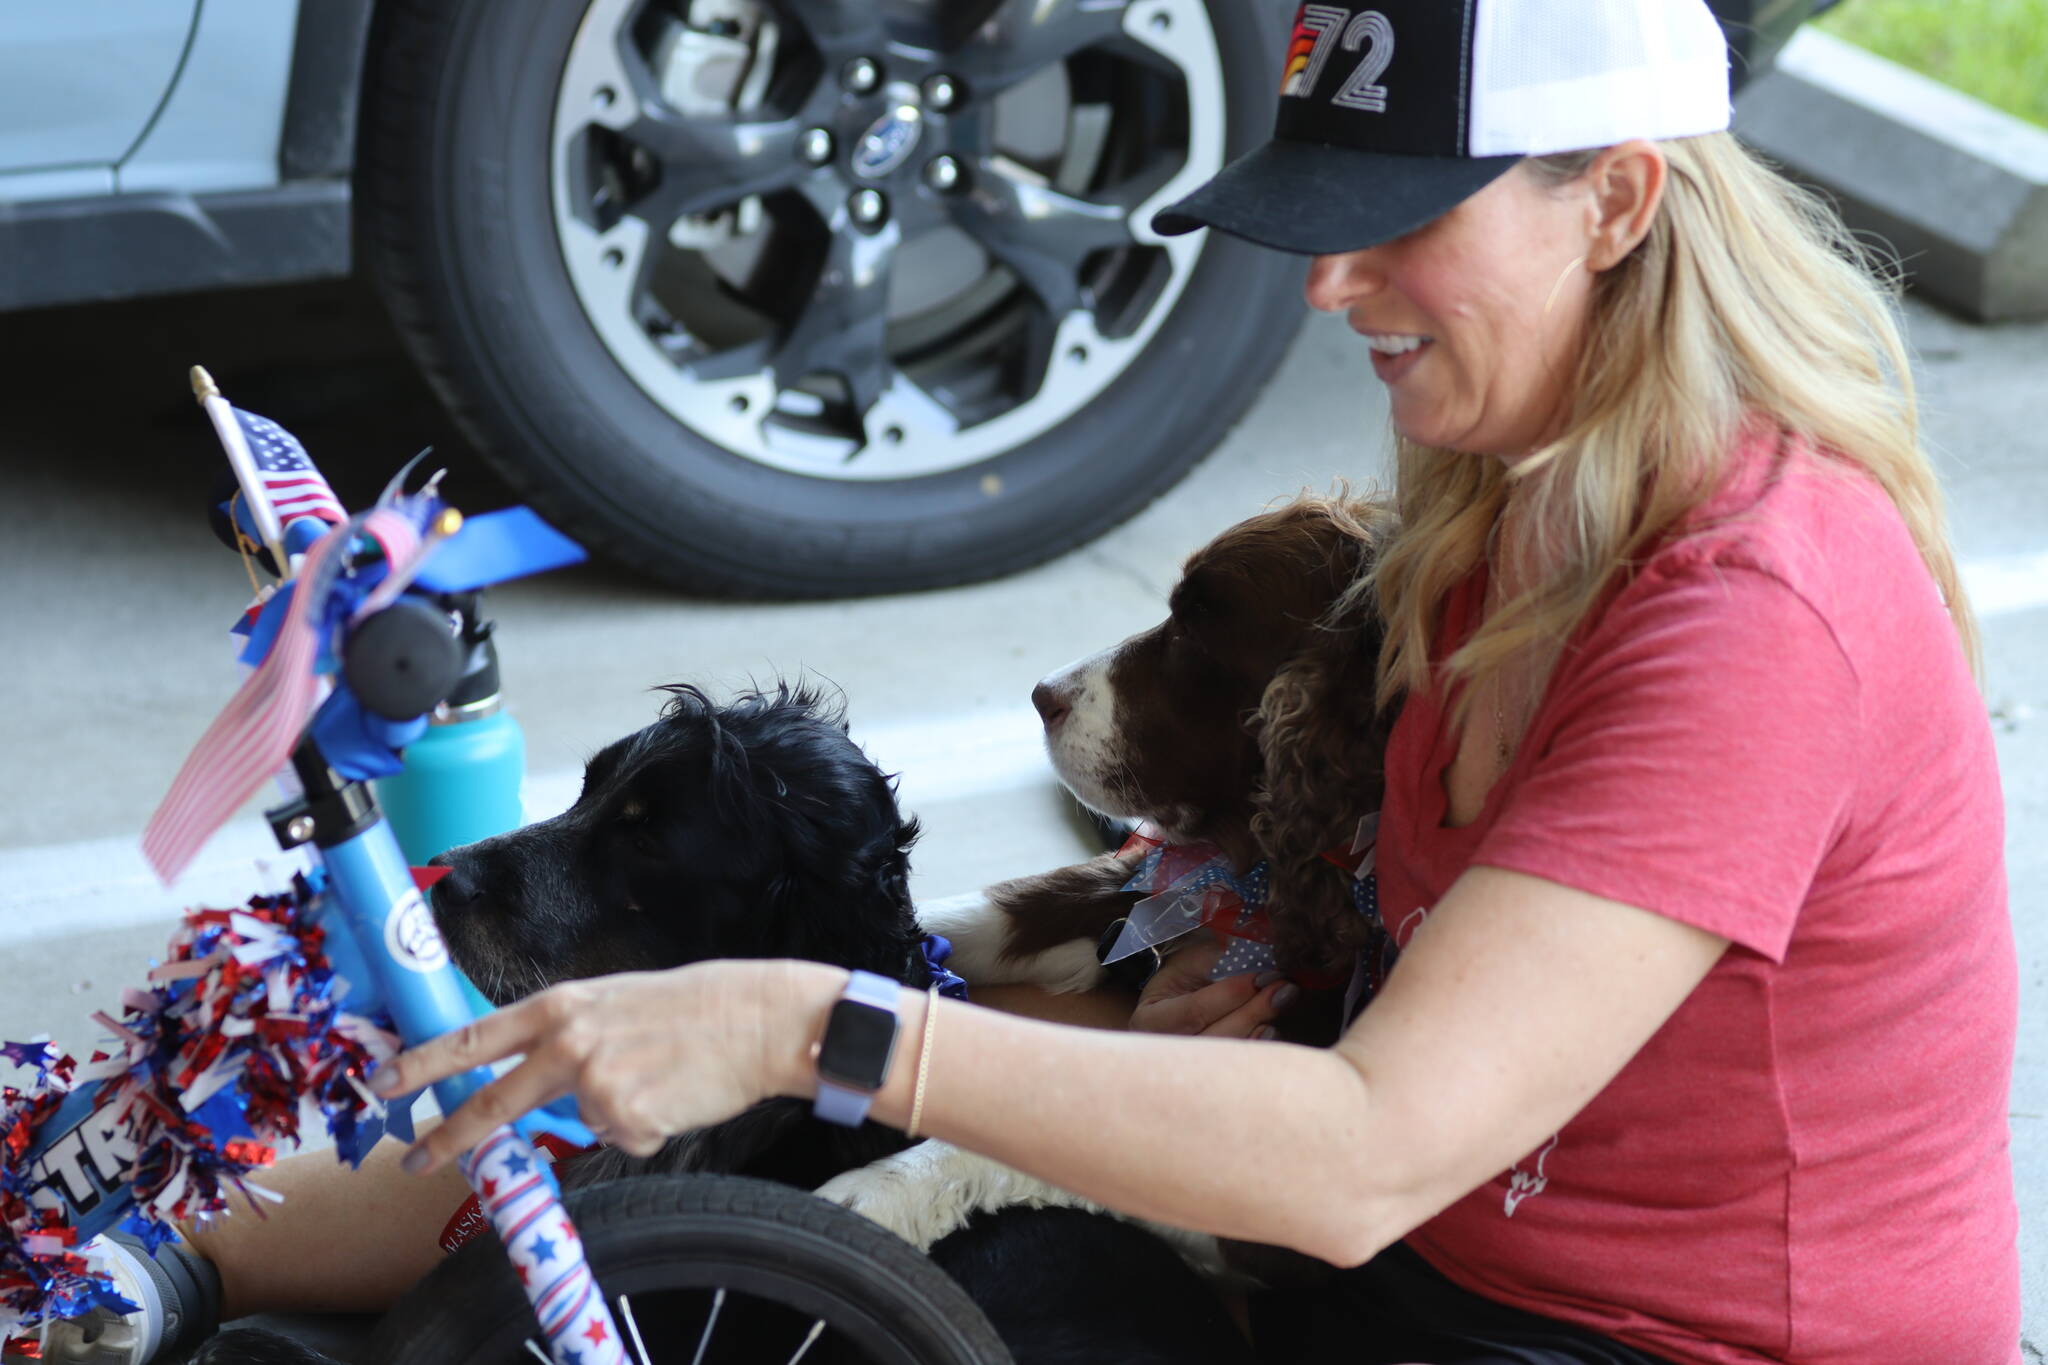 Holly Johnson, with help from dogs Hazel and Stella, decorates a bike during the Douglas Fourth of July Committee’s annual Bicycle Decorating session held at the Douglas Public Library on July 2, 2022. (Michael S. Lockett / Juneau Empire)